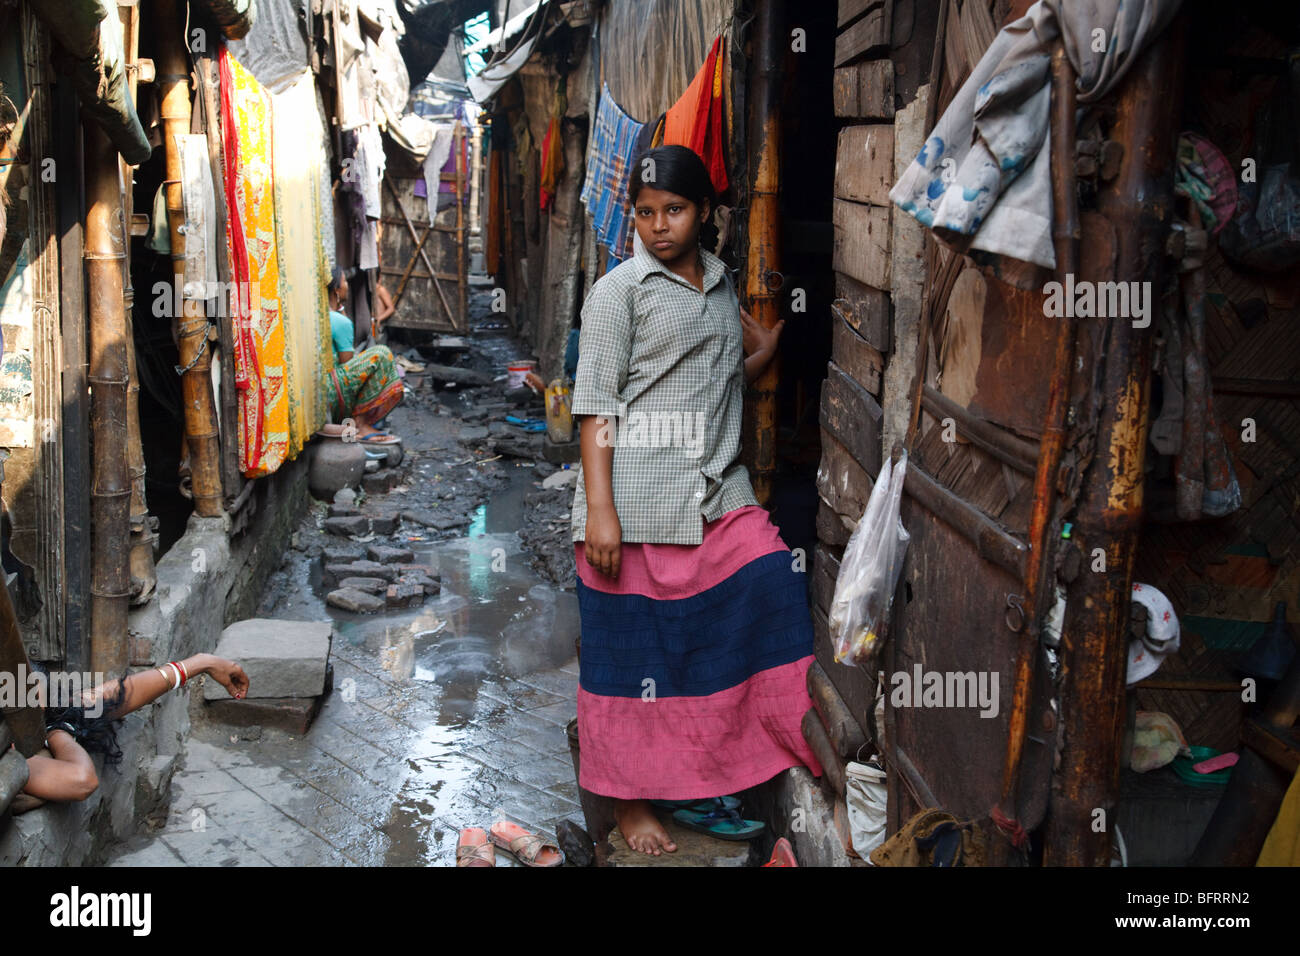 A wyoung woam at her hut doorstep in one of the slums in Kolkata, India Stock Photo